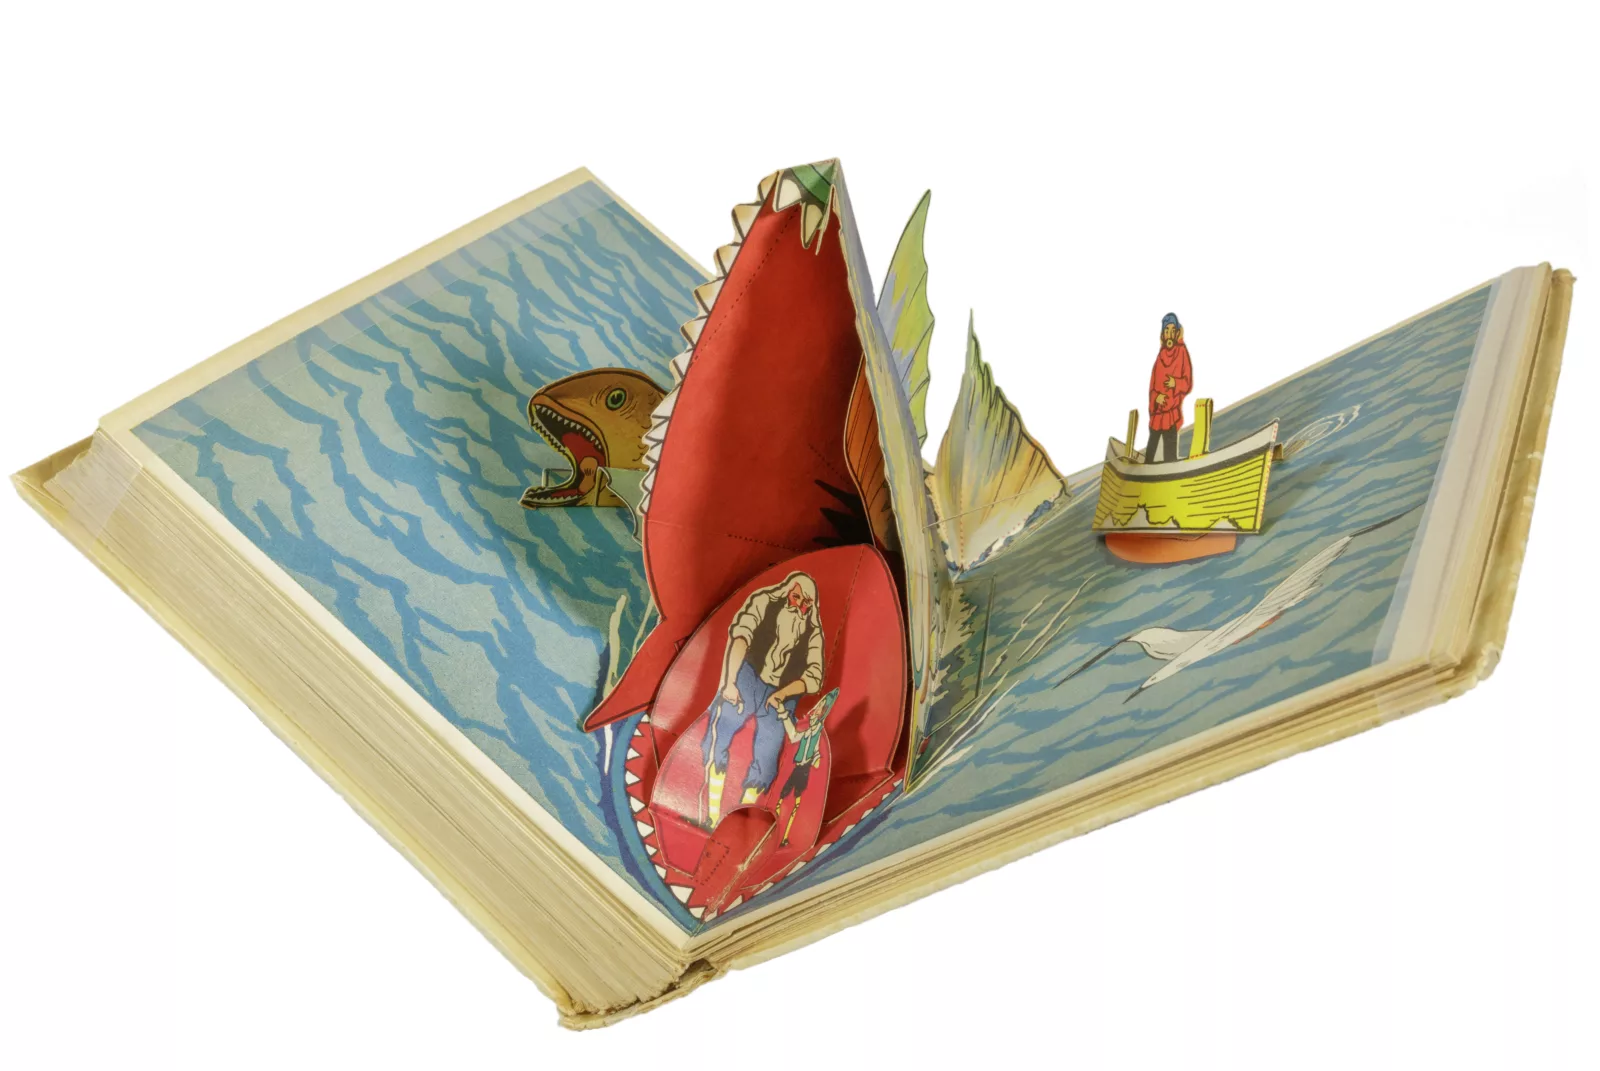 Newberry Library  Pop-Up Books through the Ages Exhibition Opening